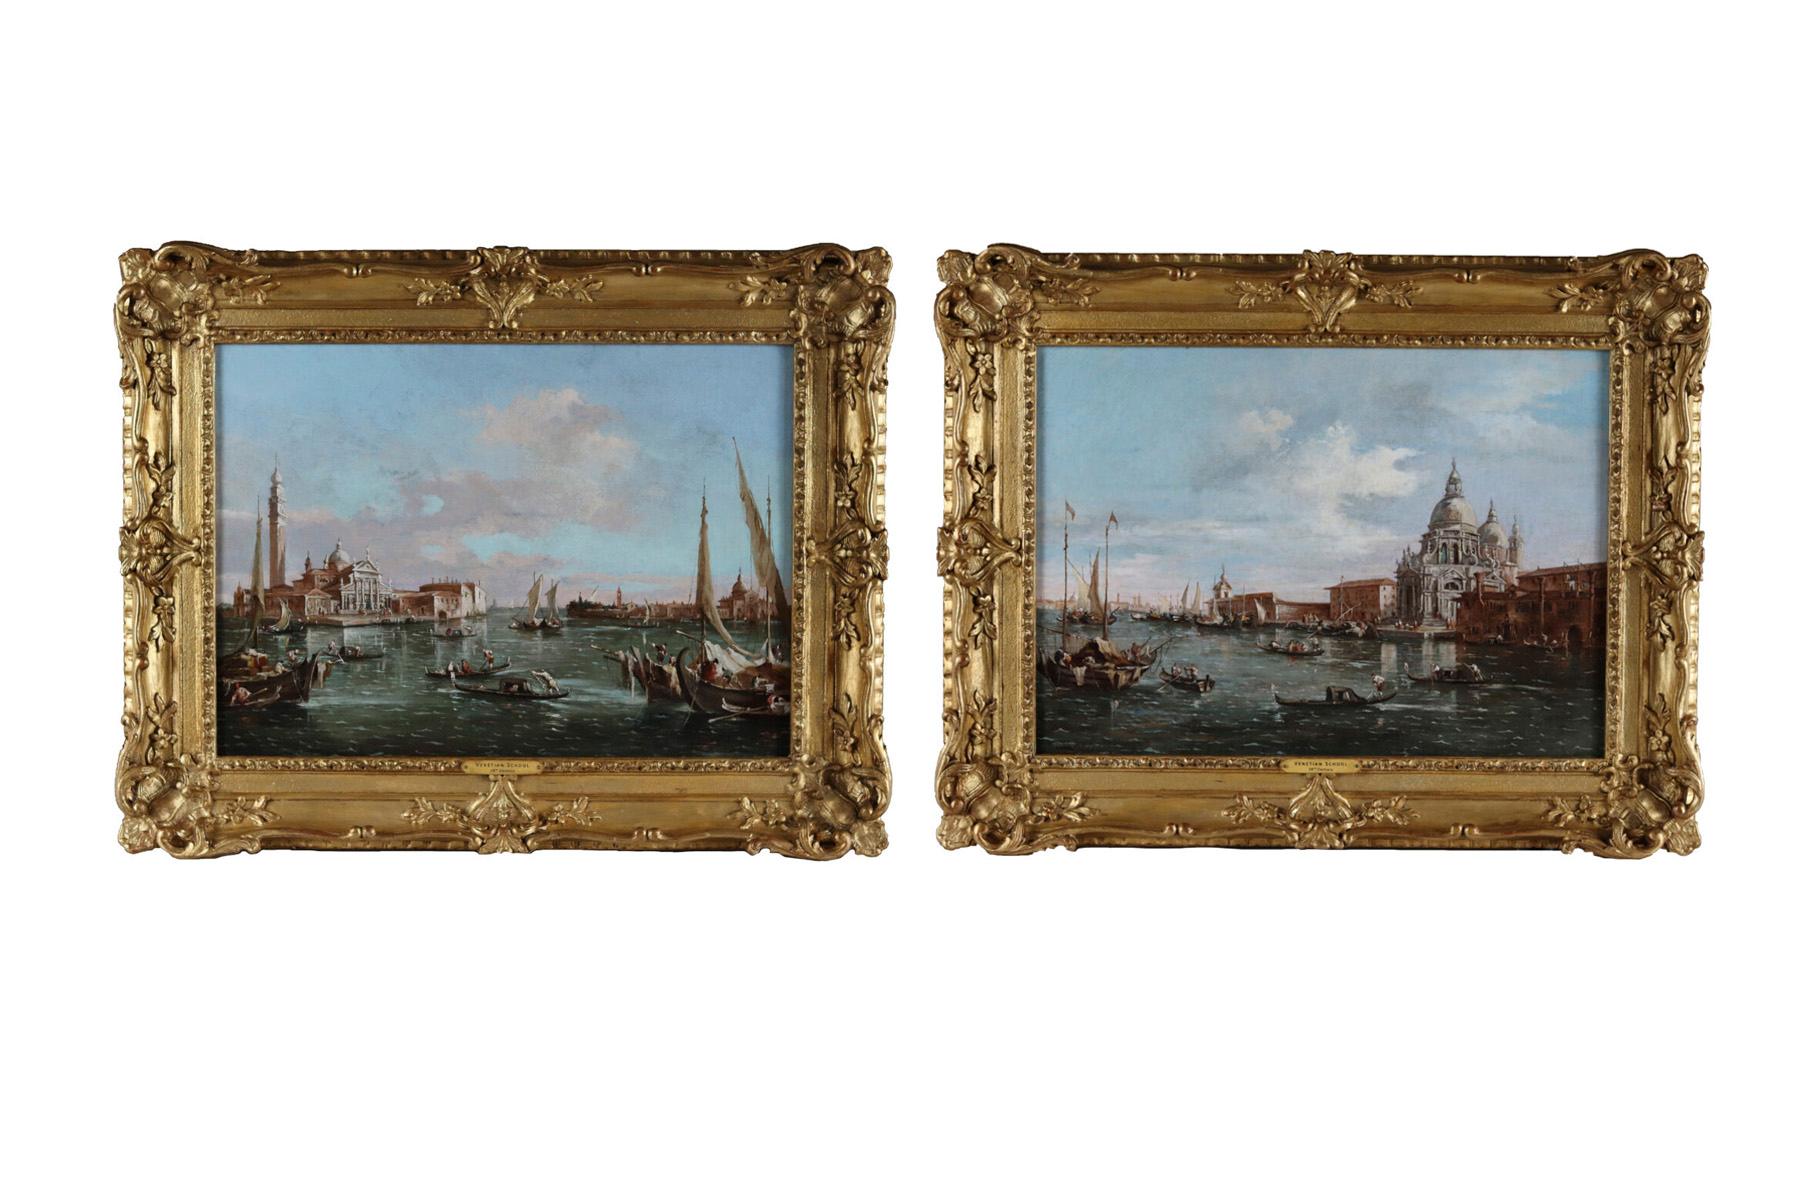 A Pair of 18th century Venetian Canal Scenes in the Style of Francesco Guardi   For Sale 7